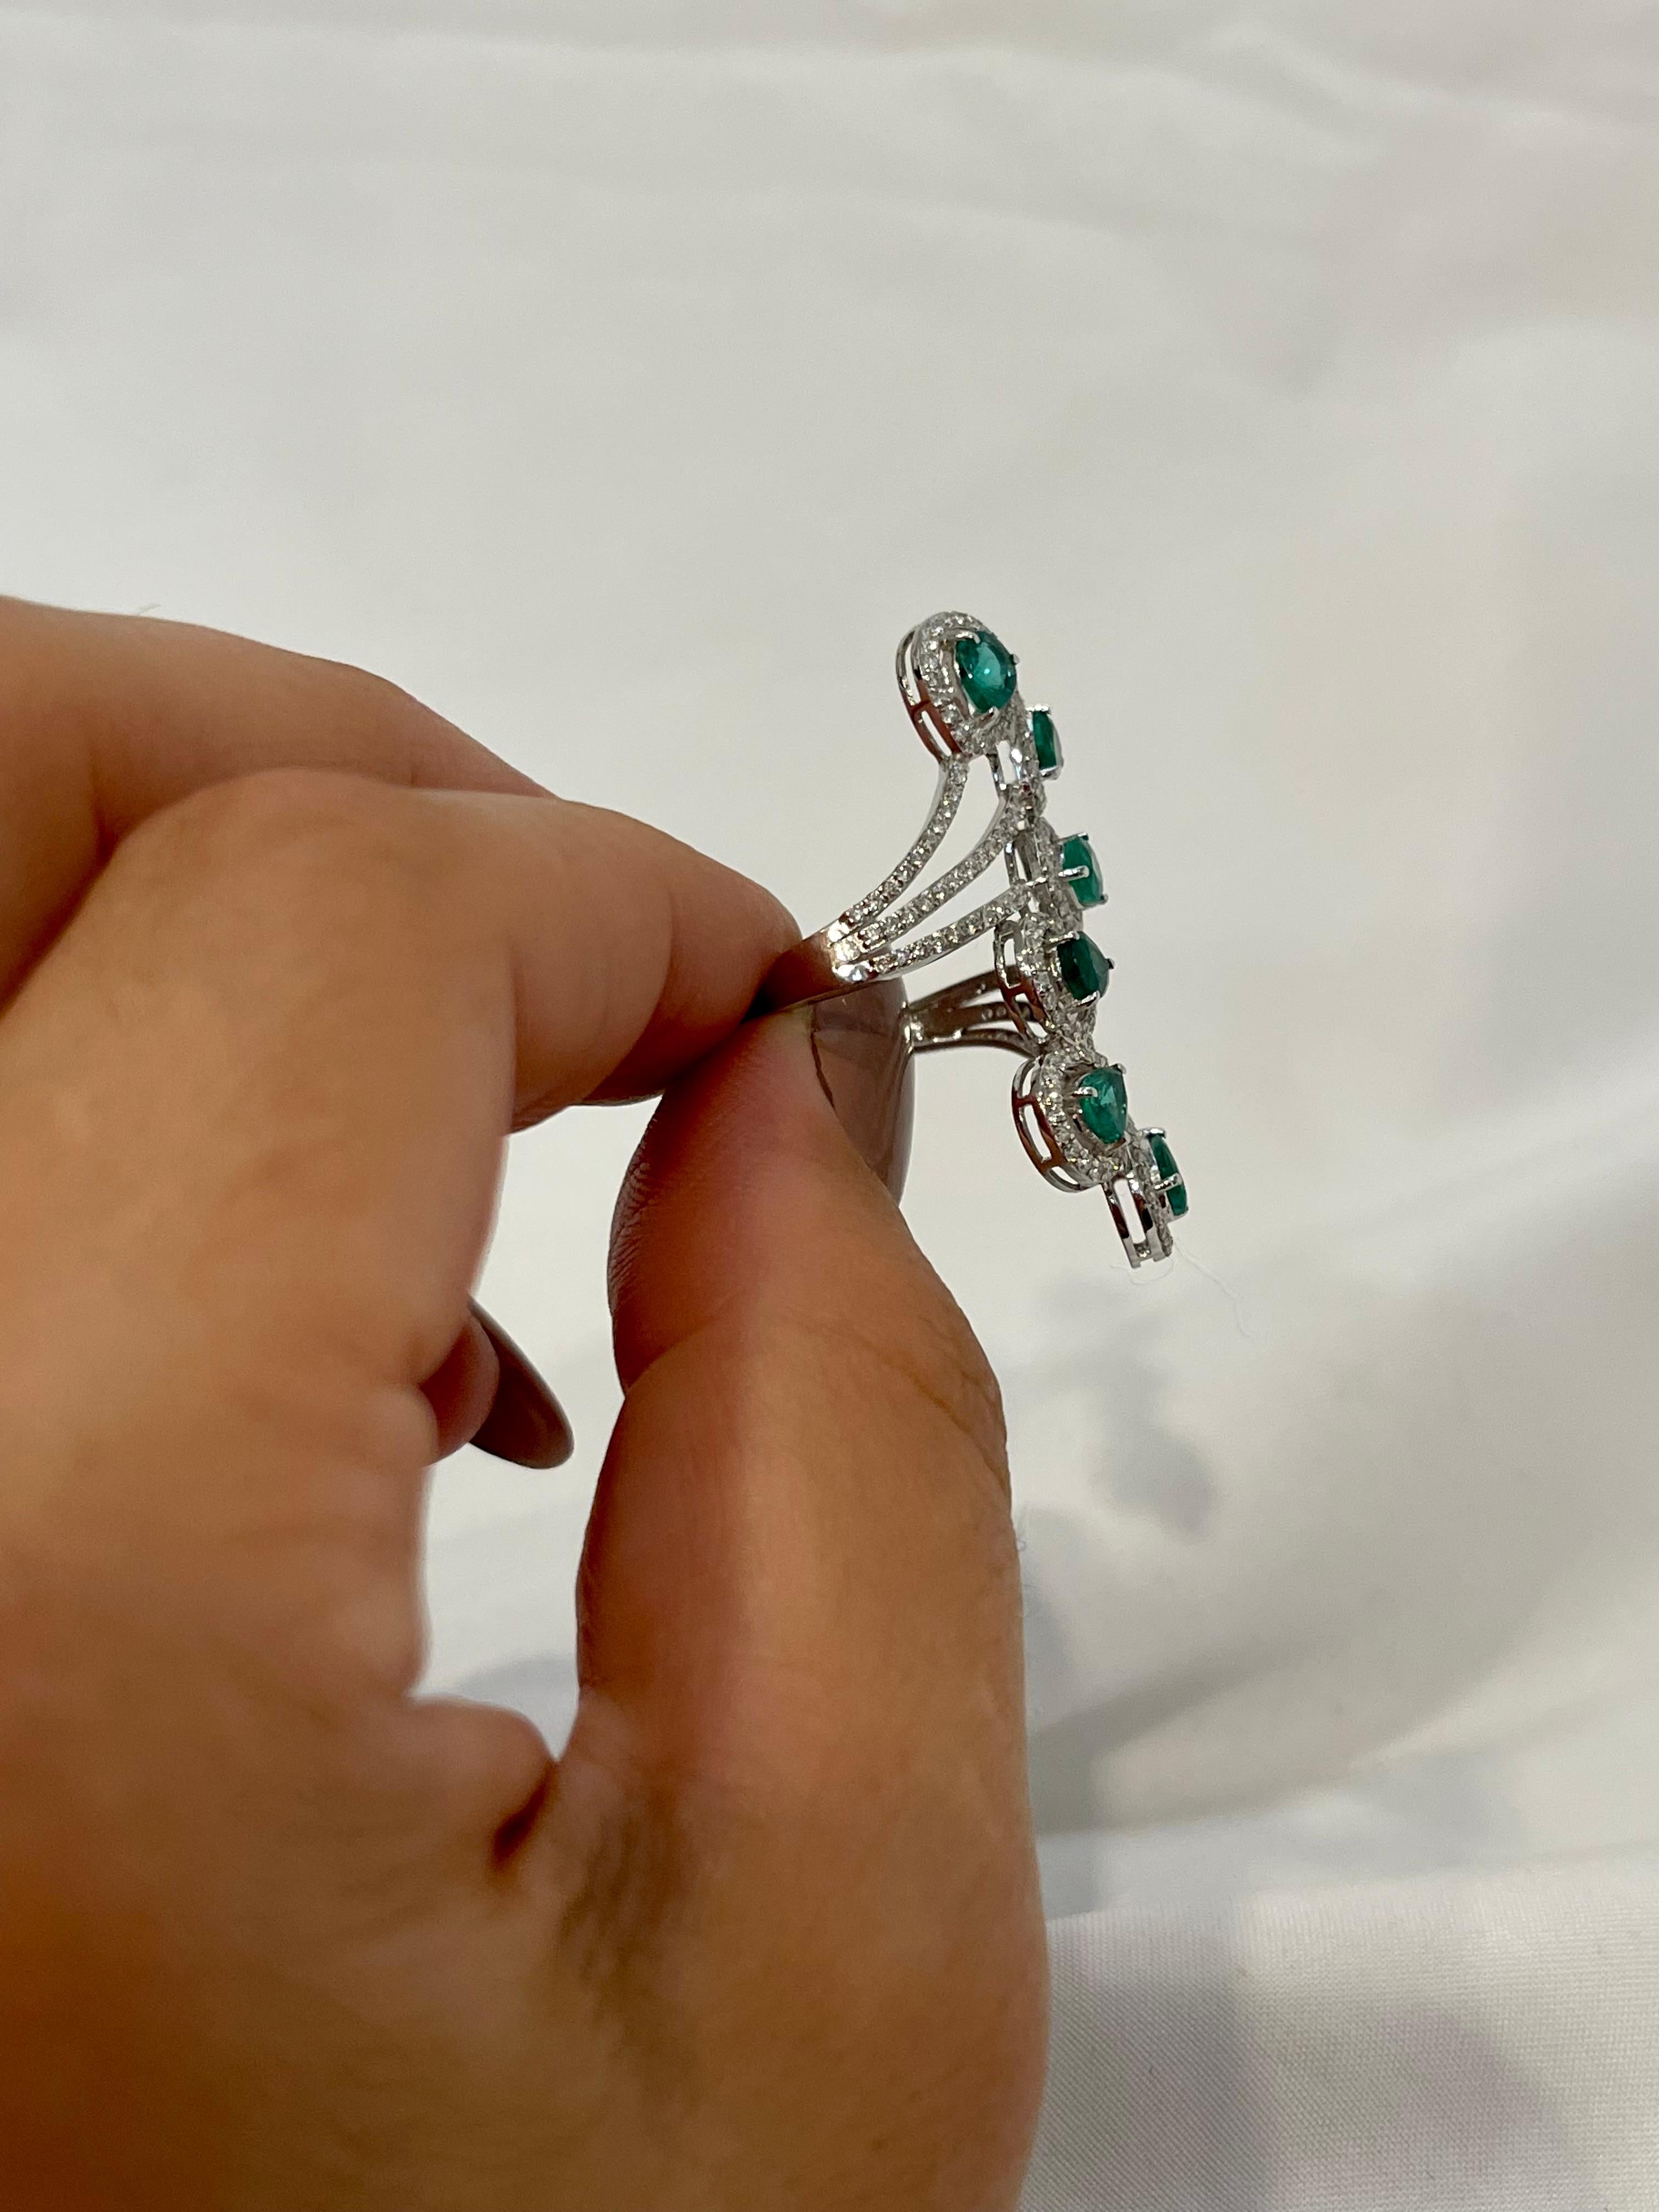 3 Ct Natural  Zambian Emeralds and 1.2 Ct Diamond Ring in 14 karat White Gold For Sale 6